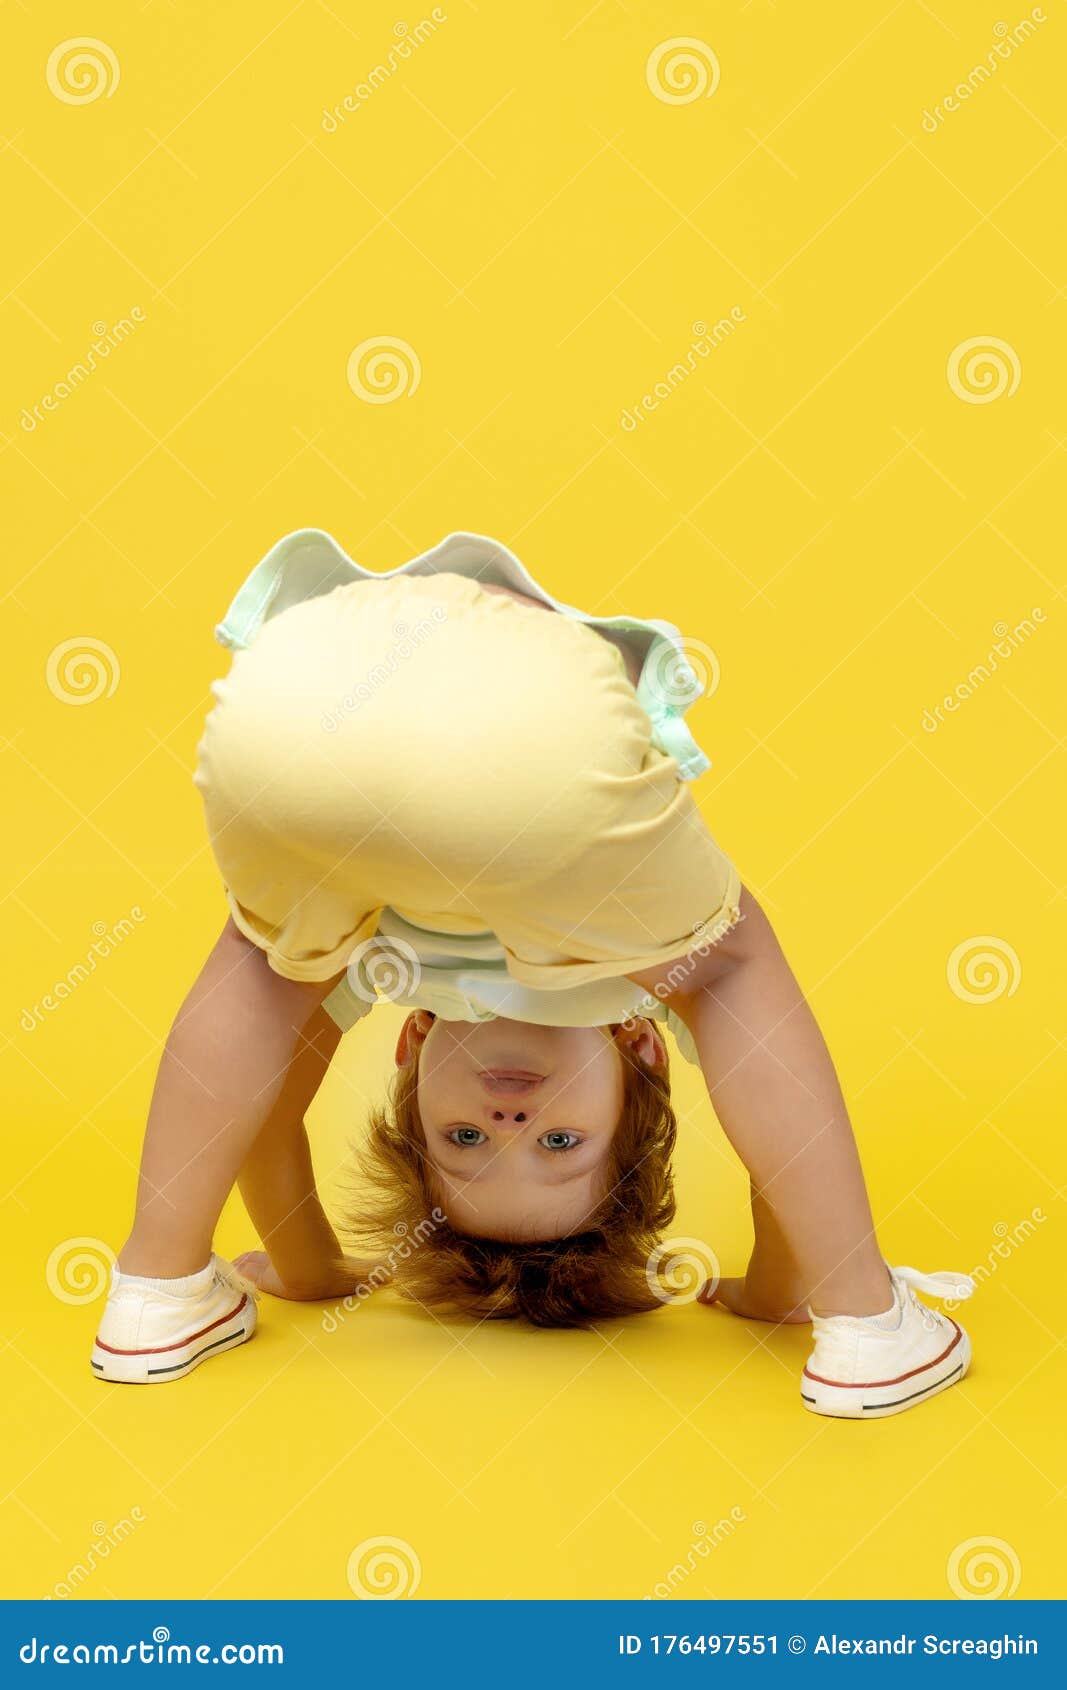 Funny Kid Playing Upside Down Over Yellow Background. Stock Image - Image  of play, fashionable: 176497551